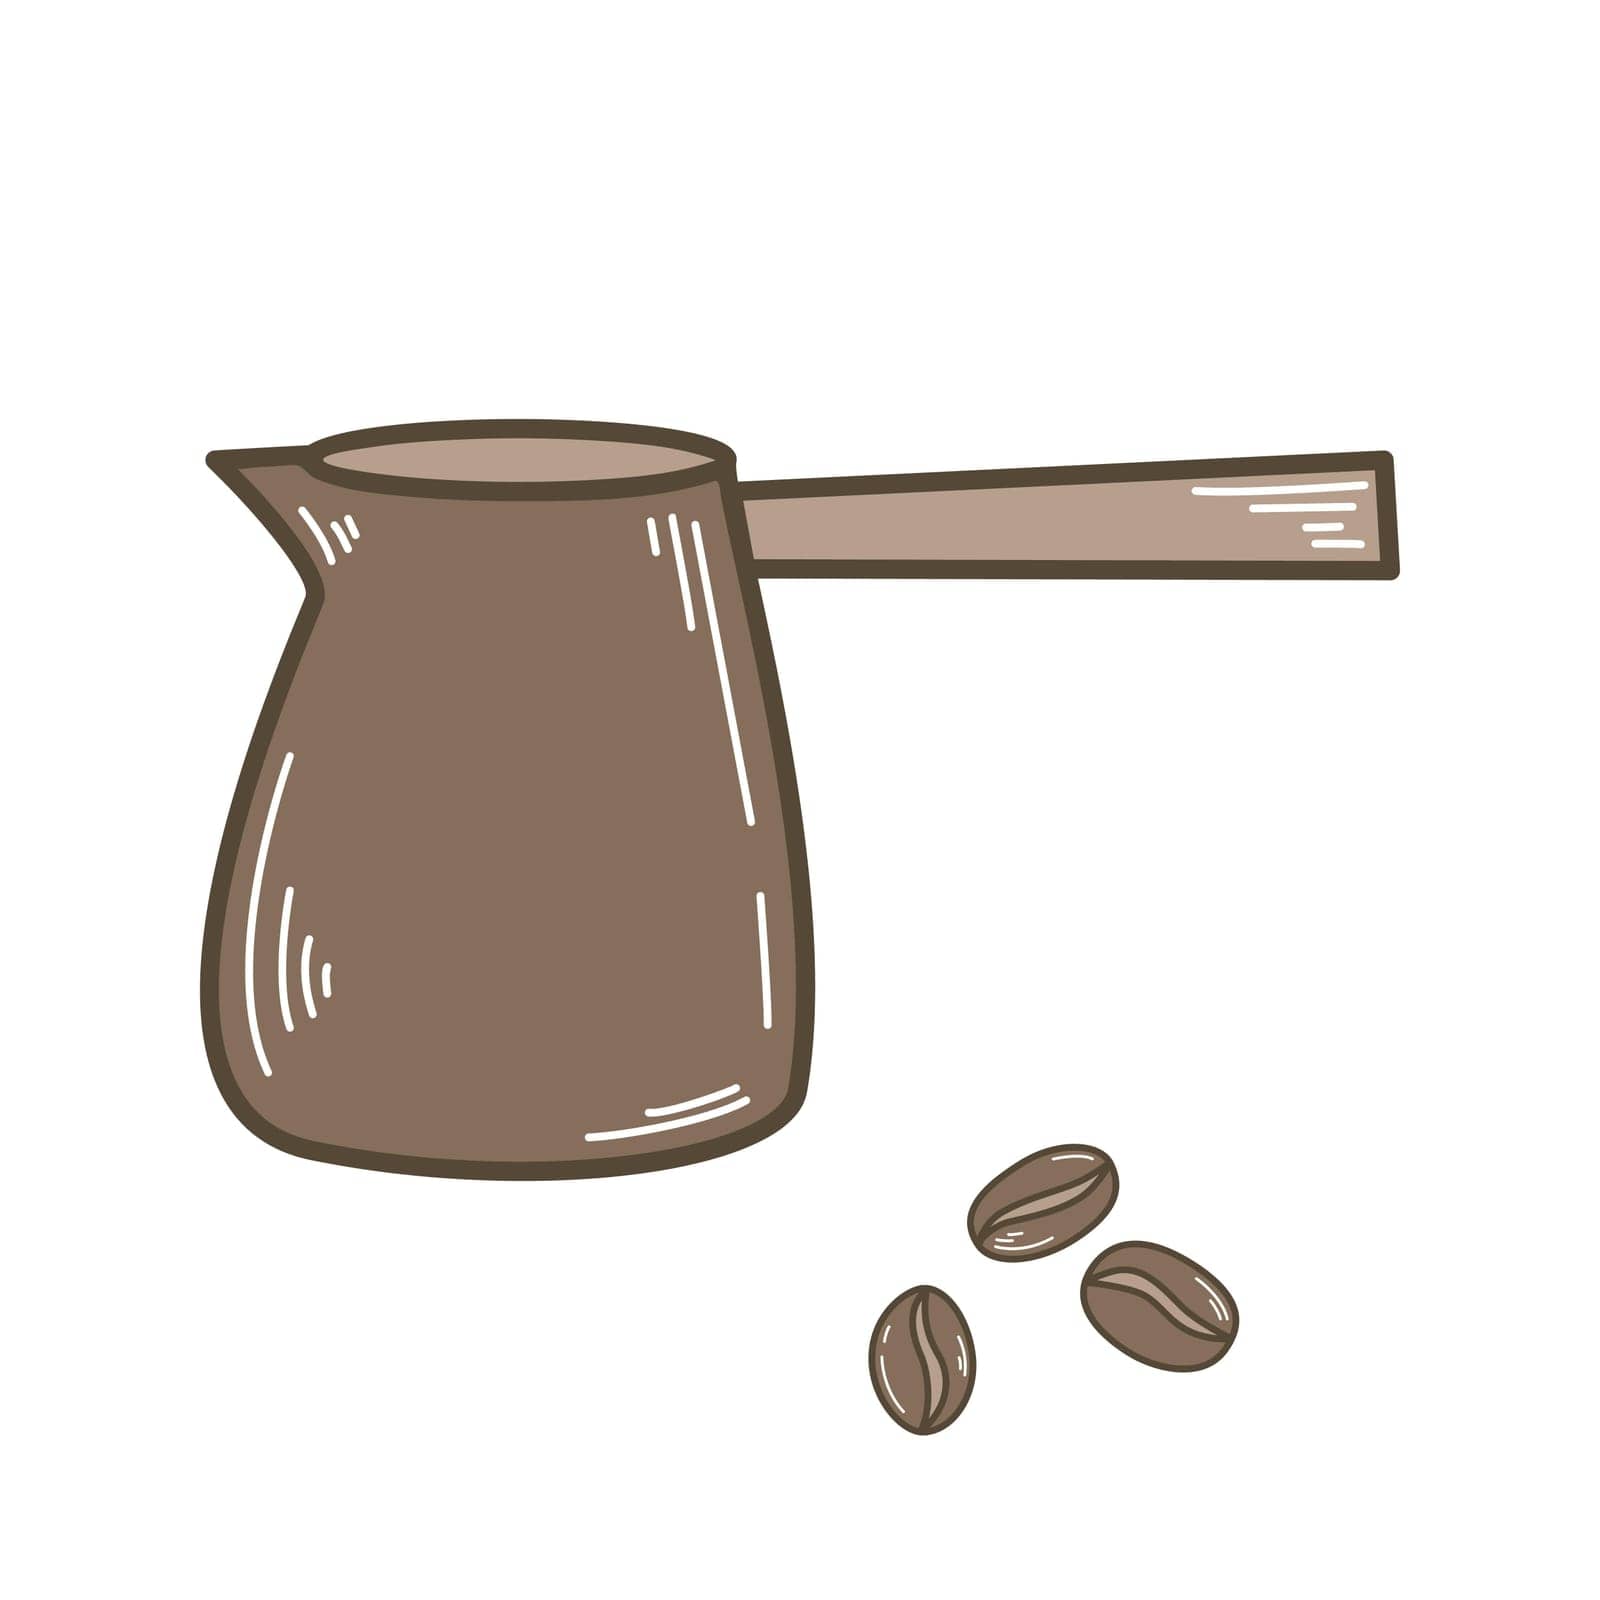 Coffee pot and coffee beans clip art. Saucepan for making Americano coffee in home kitchen, colored doodle sketch style. Brewing coffee beans, isolated vector illustration